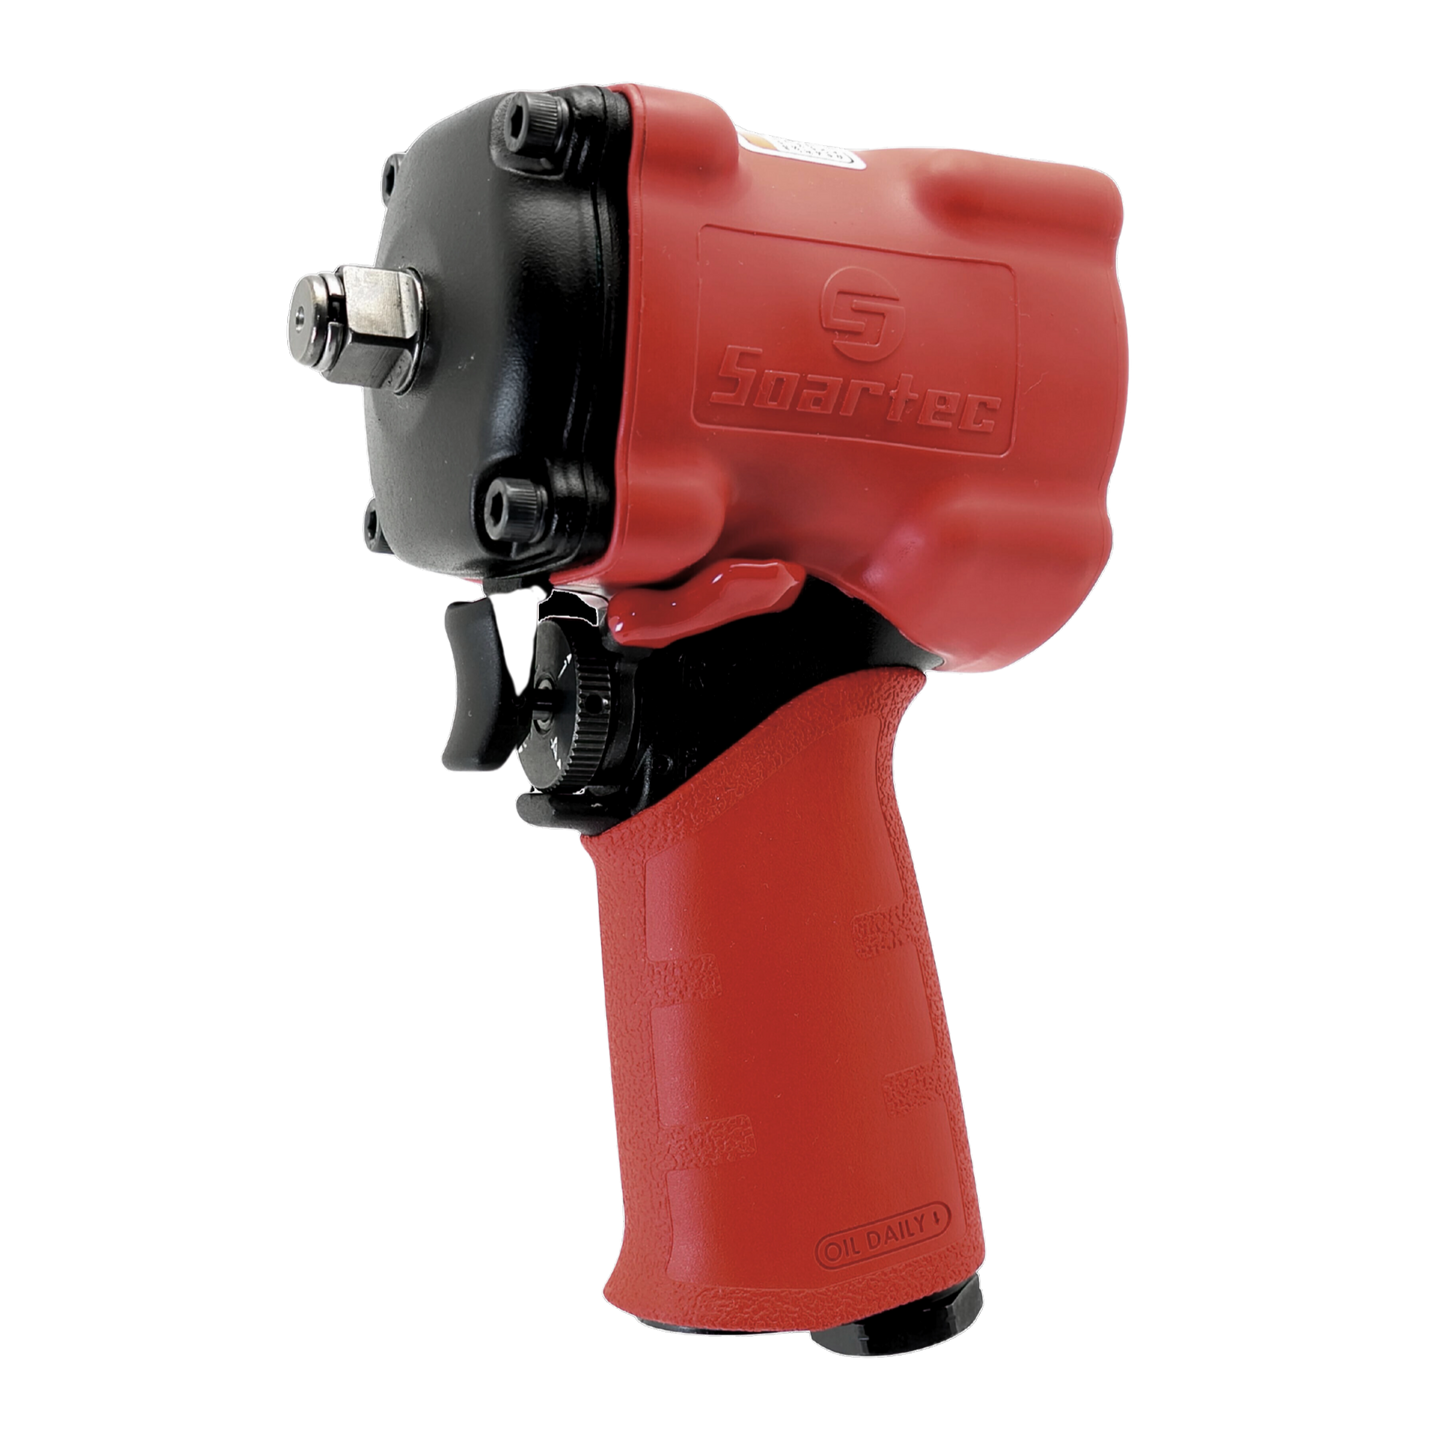 WS-217S Soartec 1/2" Compact Impact Wrench 650 ft-lb